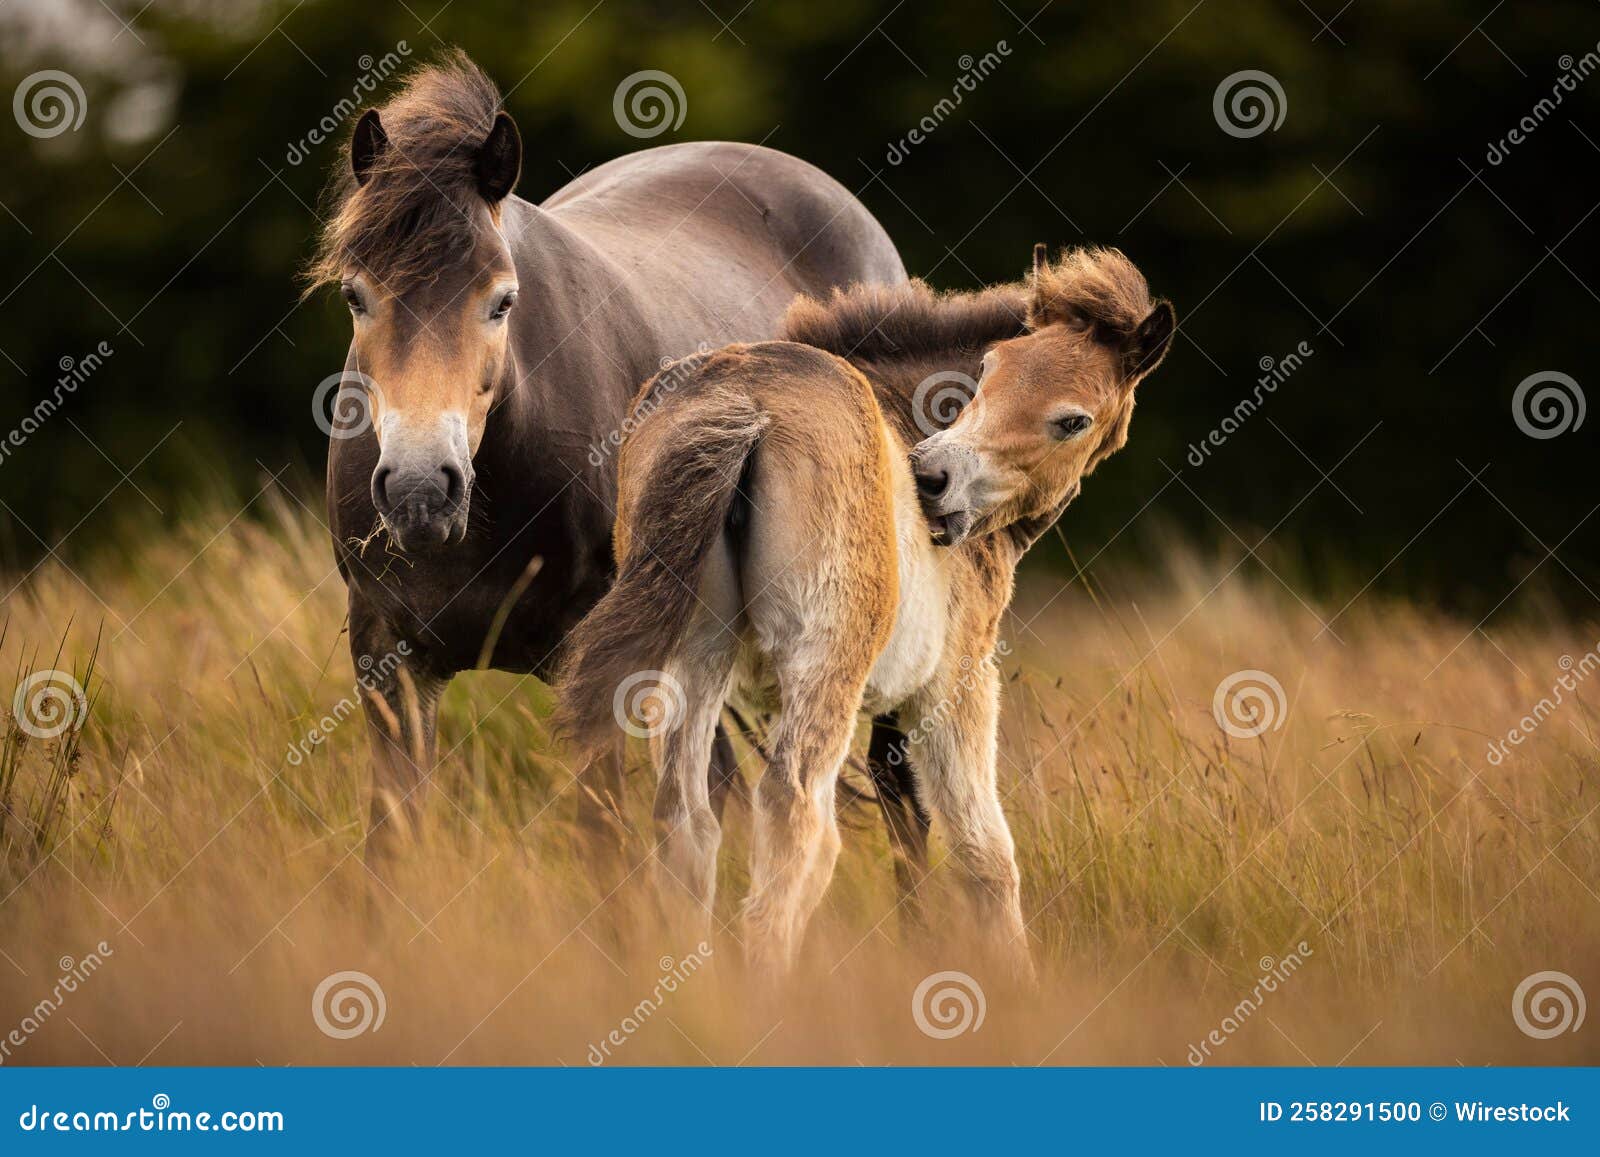 adult and a juvenil exmoor horse breed pony in a closeup shot